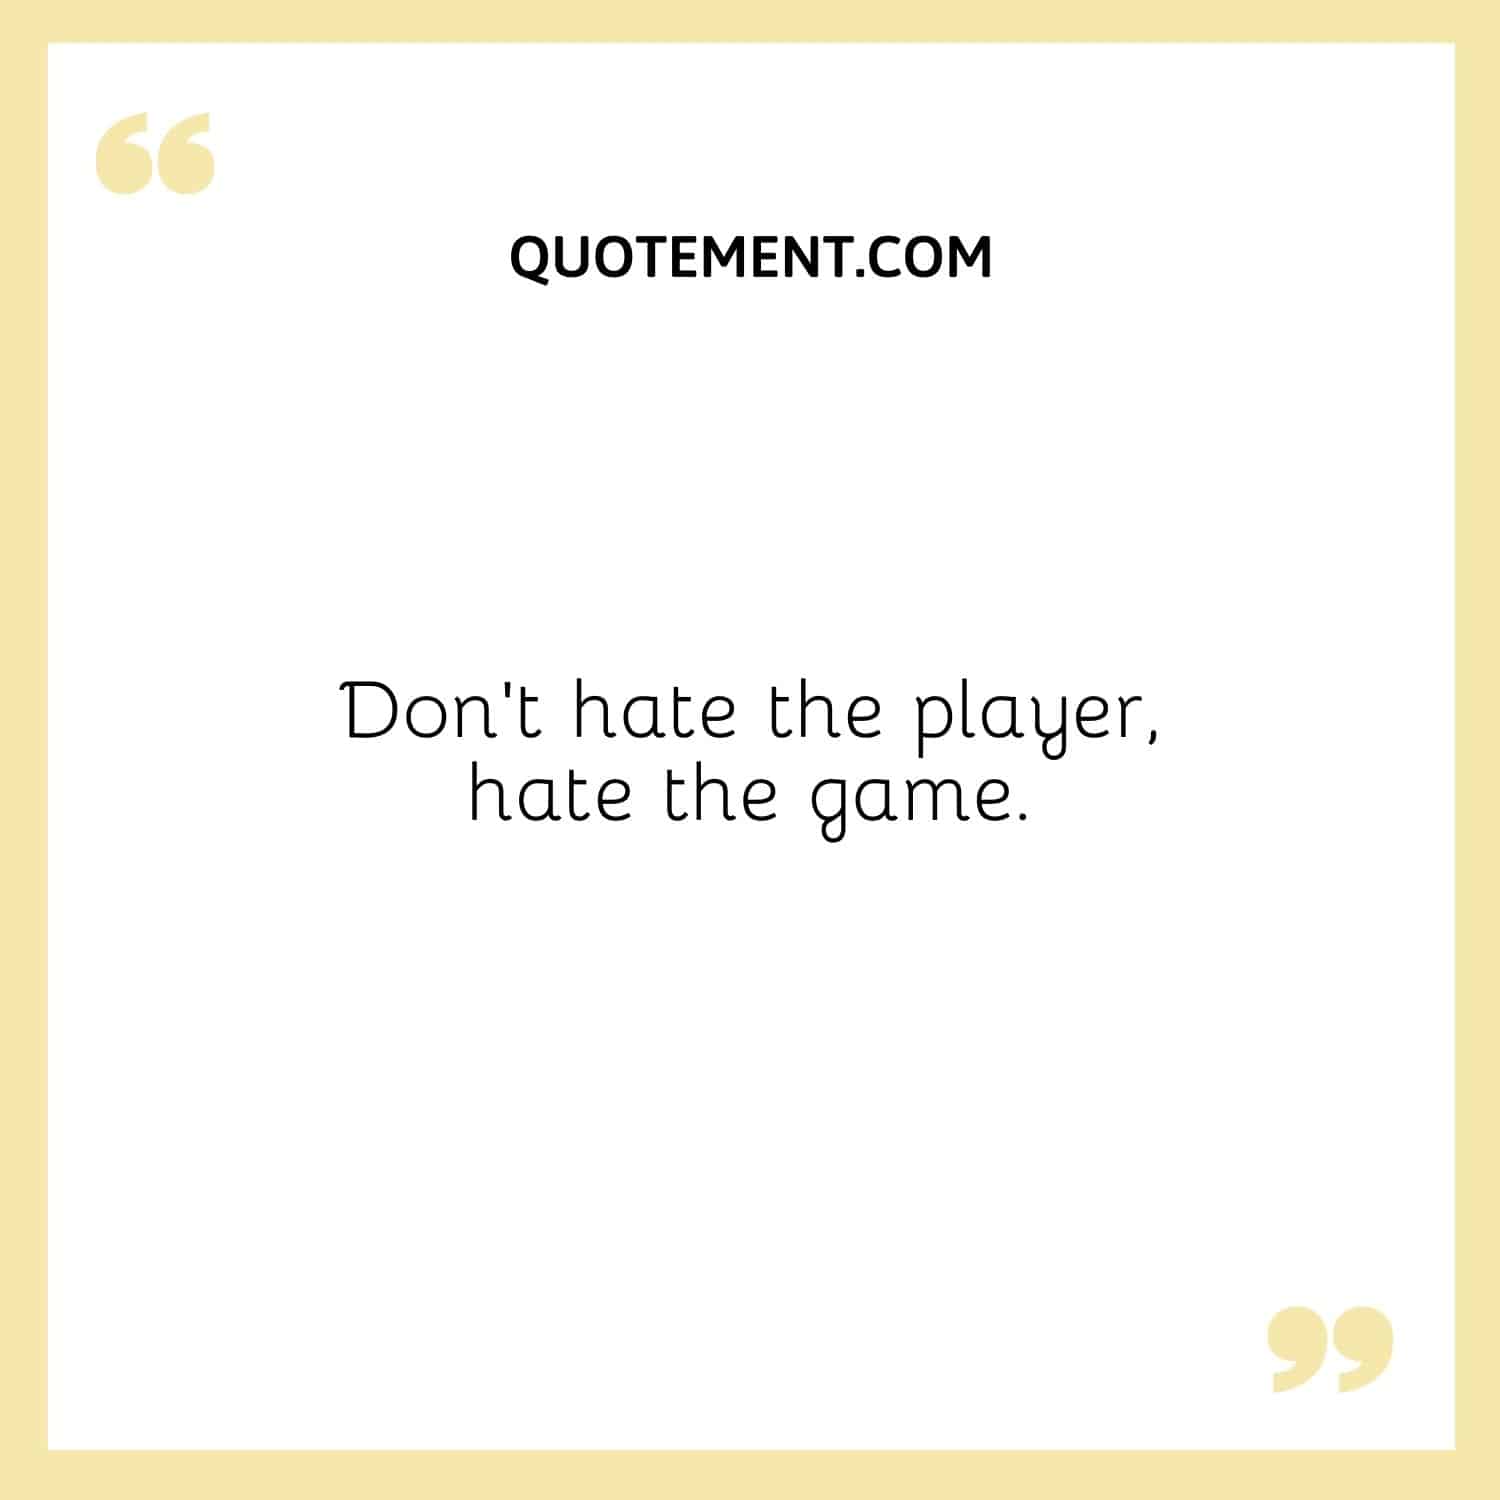 Don’t hate the player, hate the game.